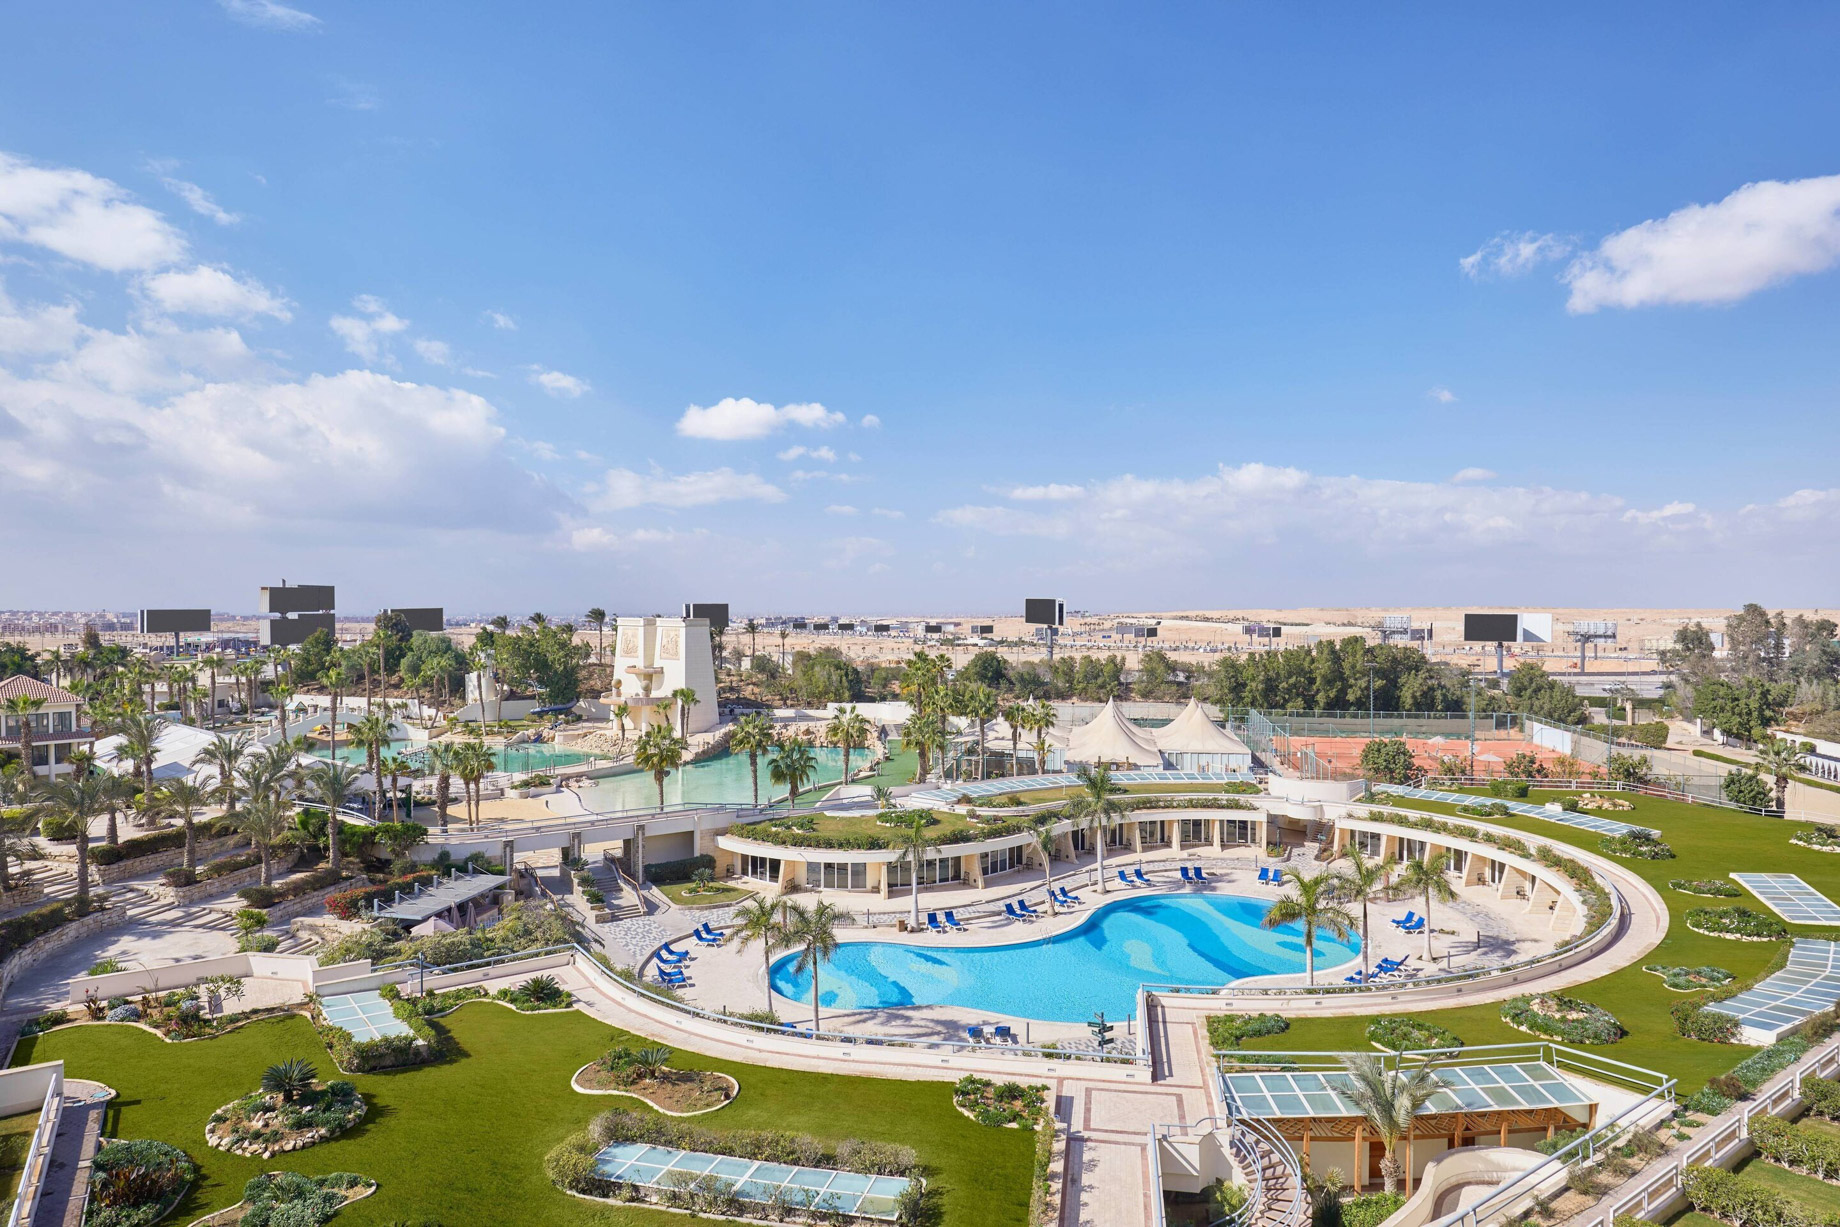 JW Marriott Hotel Cairo - Cairo, Egypt - Guest Room Pool View